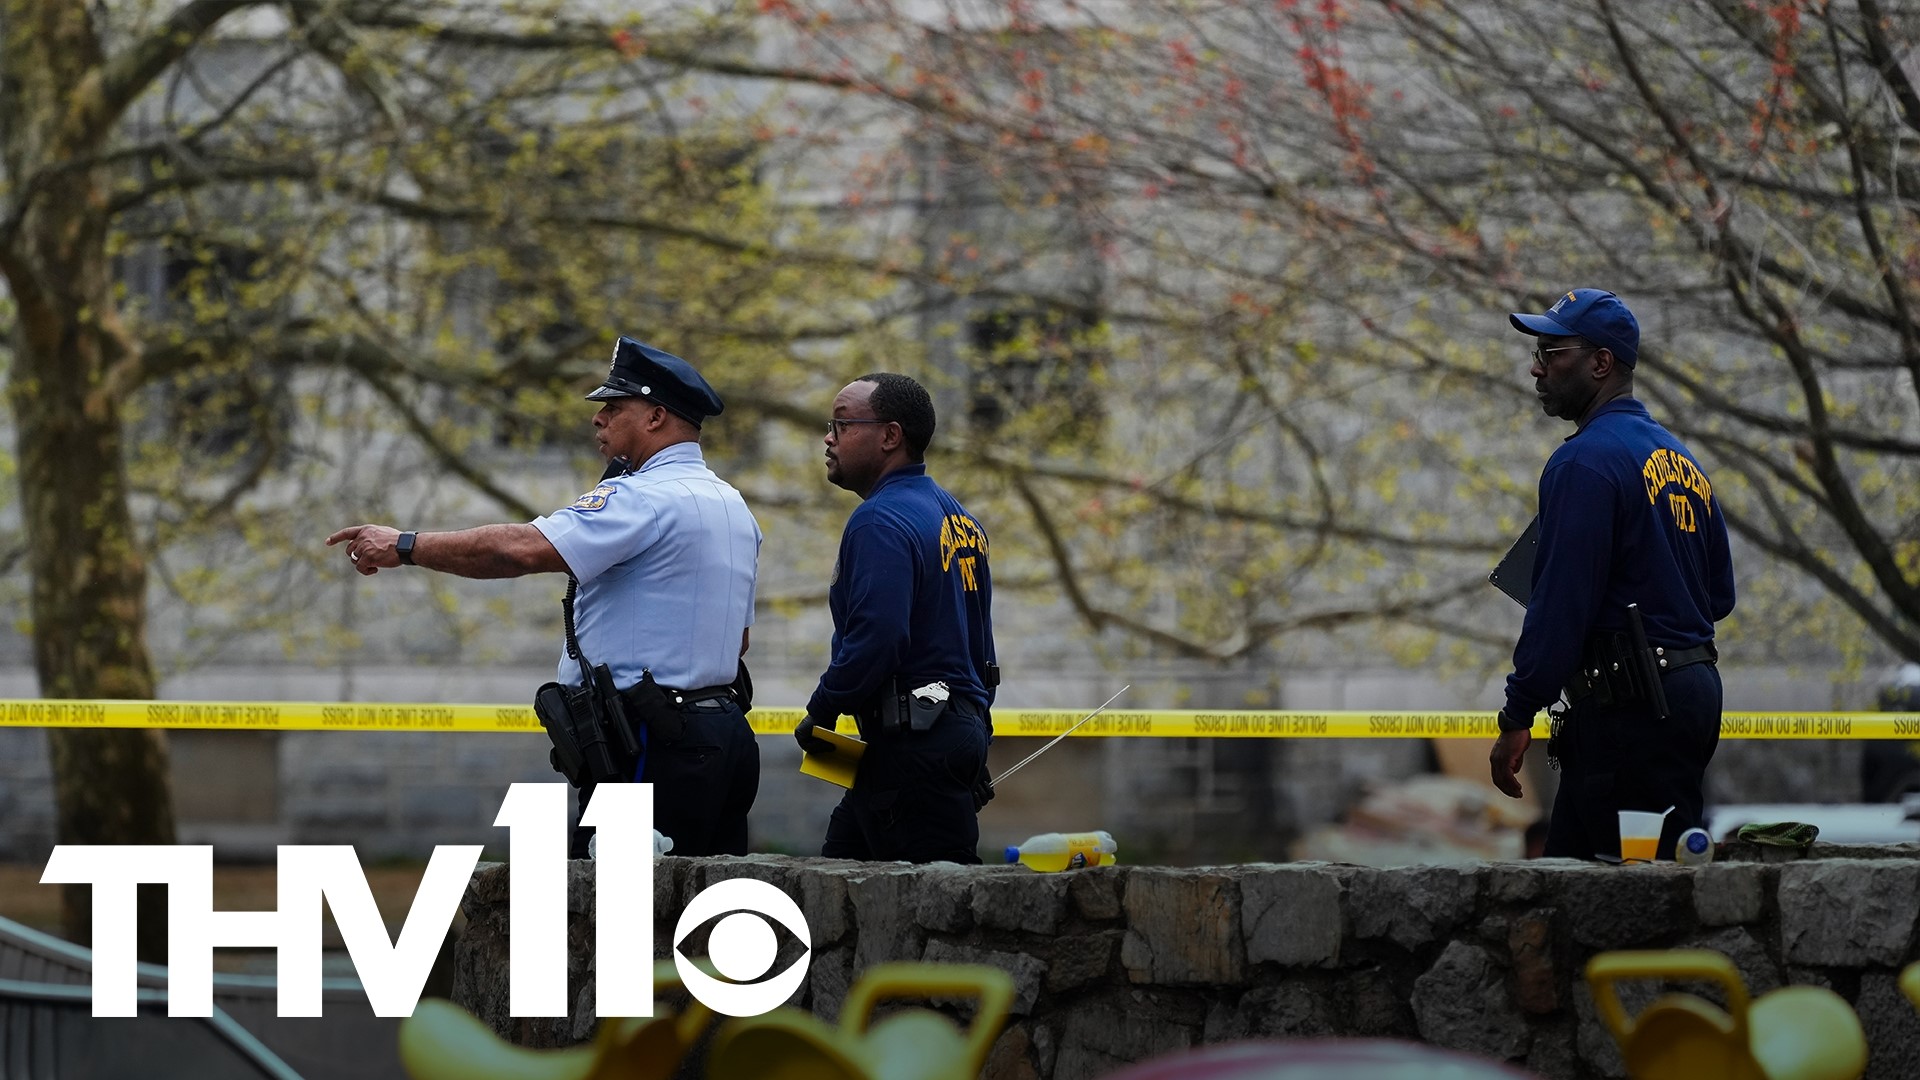 At least three people were shot and injured Wednesday at an annual Eid al-Fitr event in Philadelphia, police said.